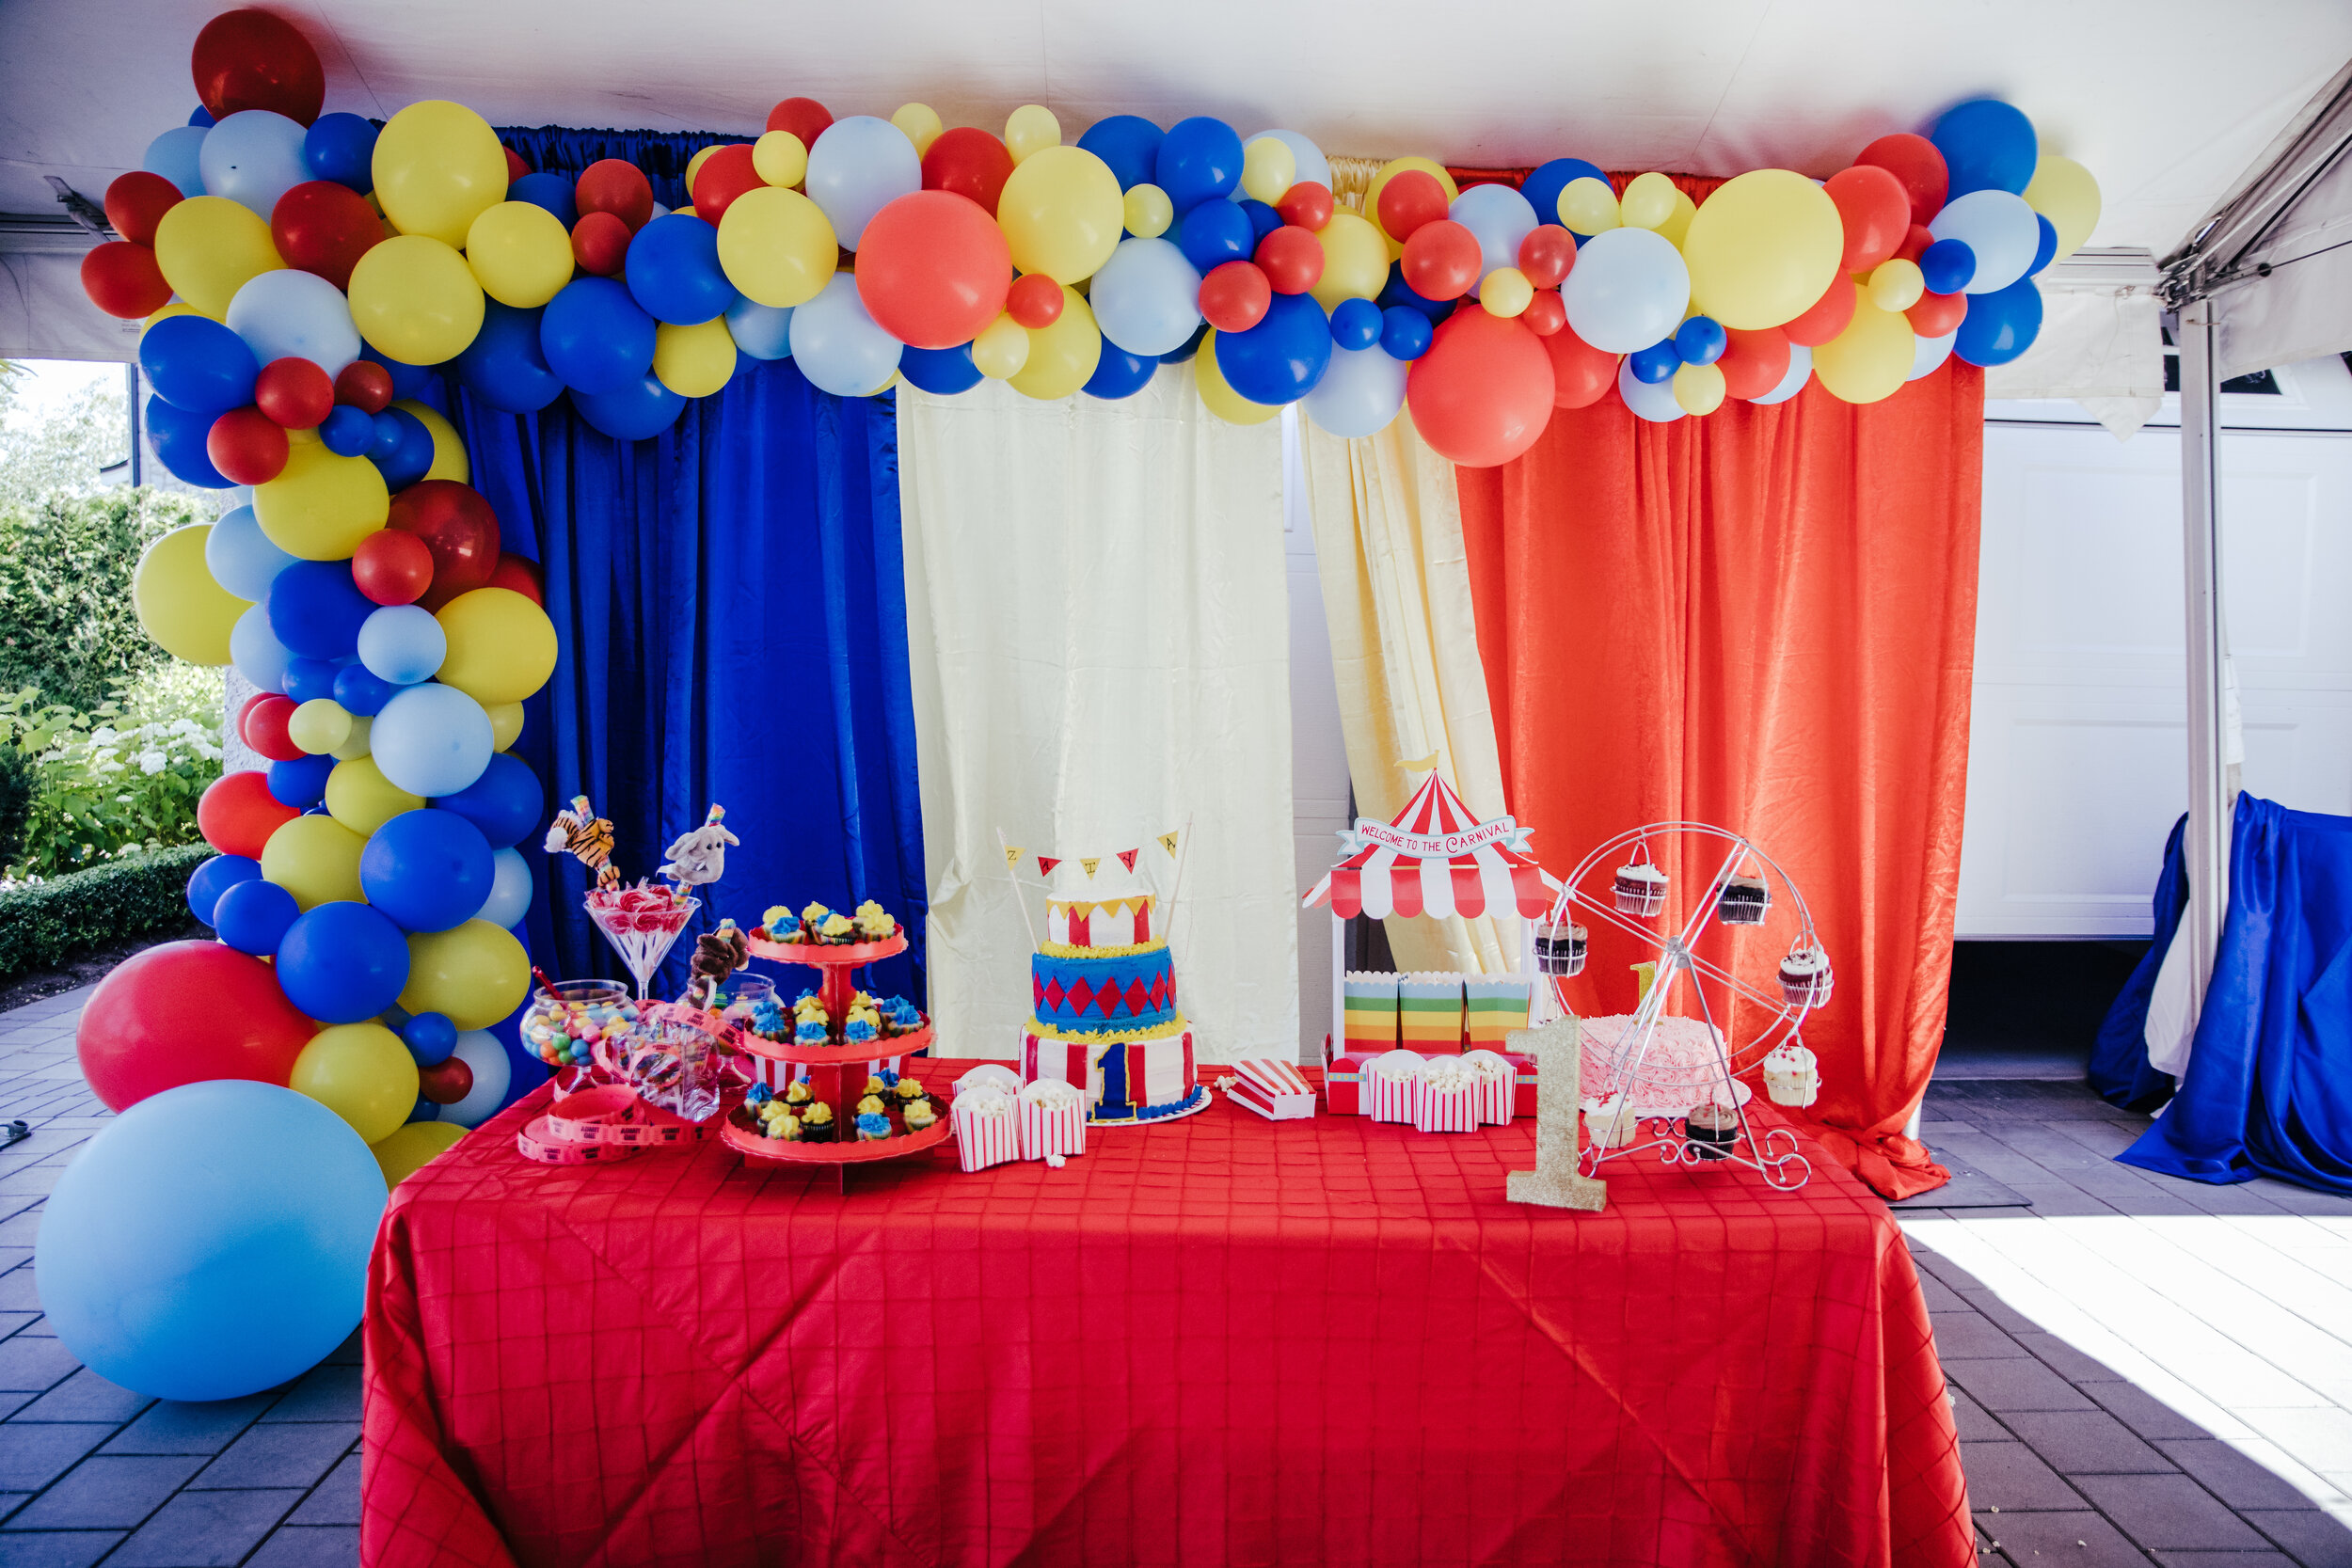 Langley Birthday Party For 1 Year Old - Event Photography